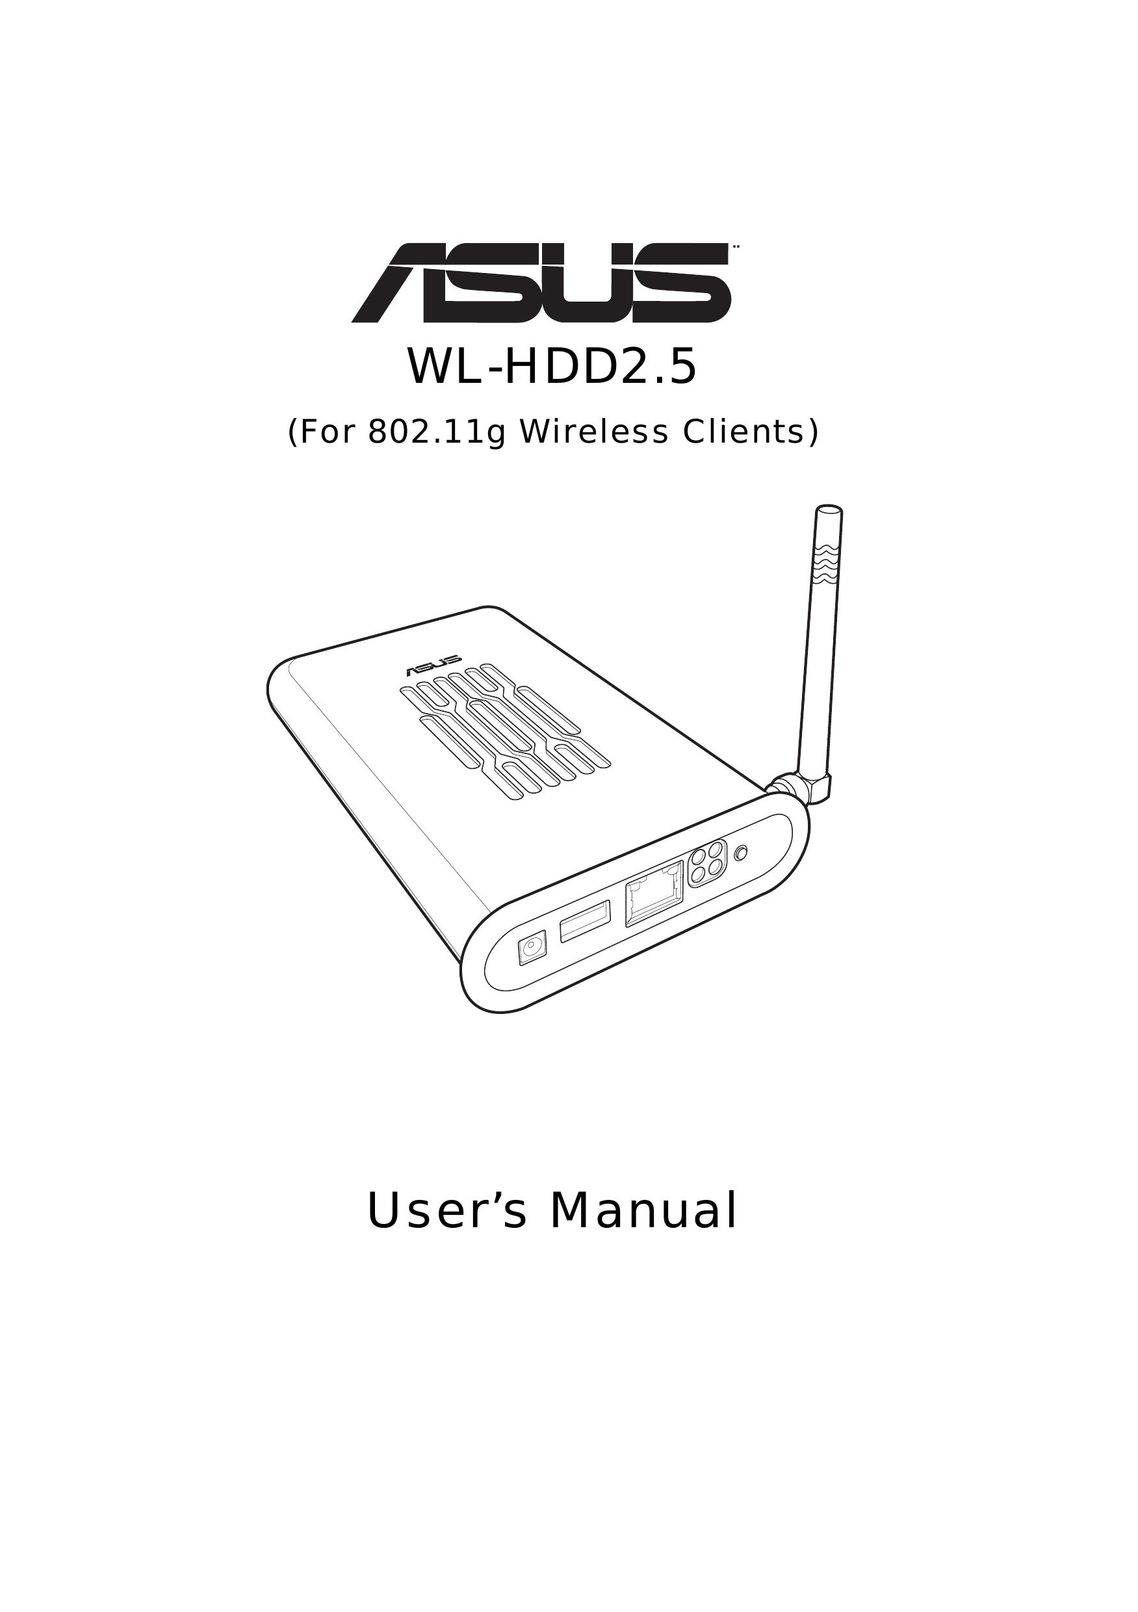 Asus WL-HDD2.5 Switch User Manual